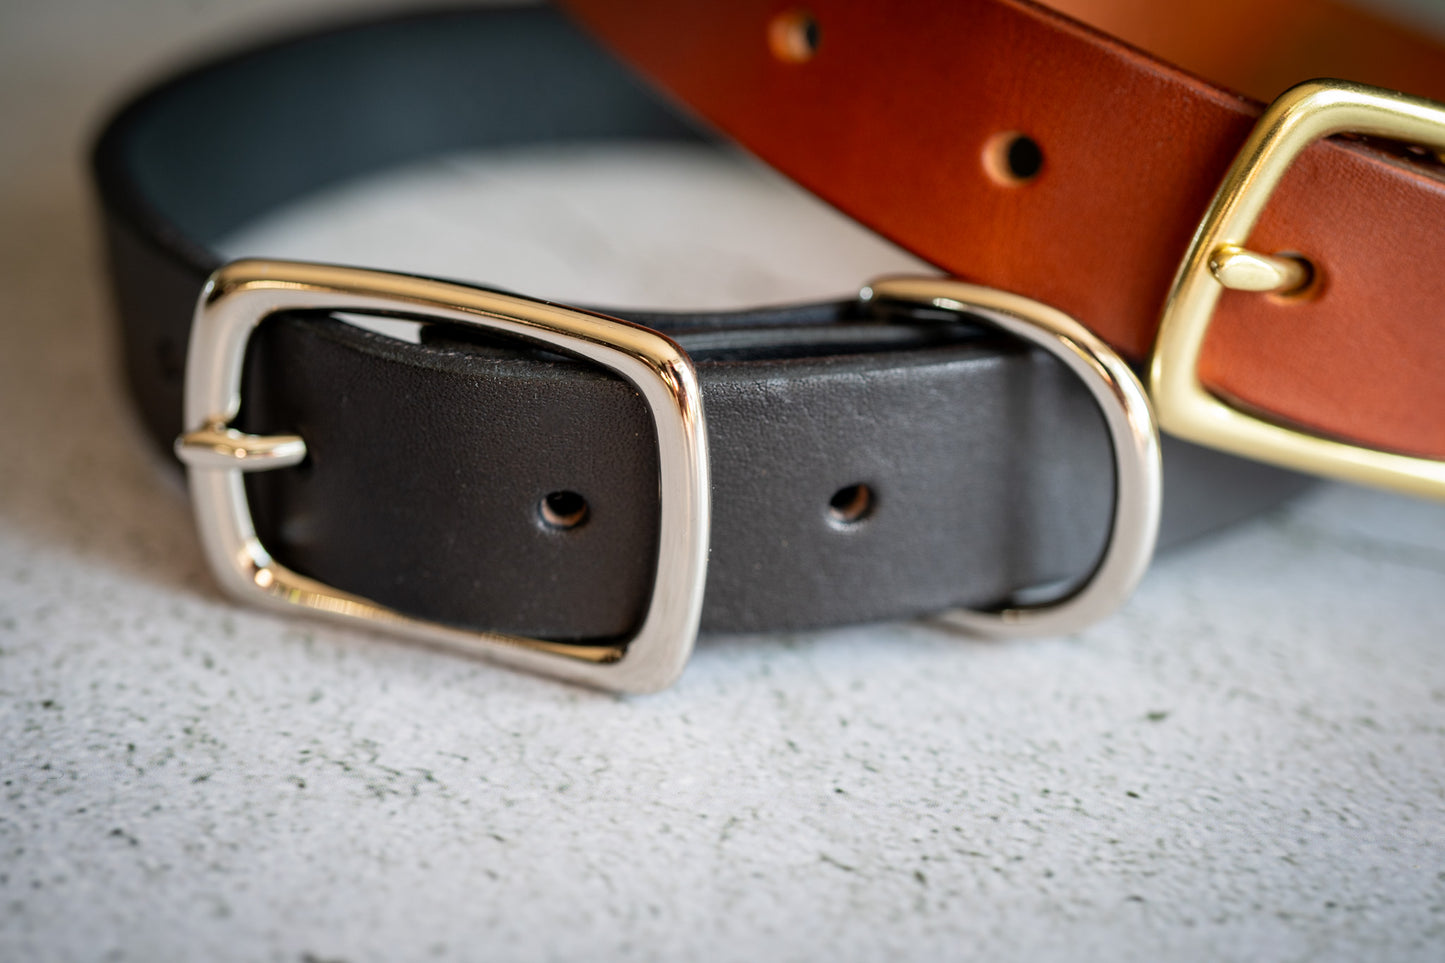 Close-up view of the nickel plated brass buckle of the black leather 1 inch dog collar.